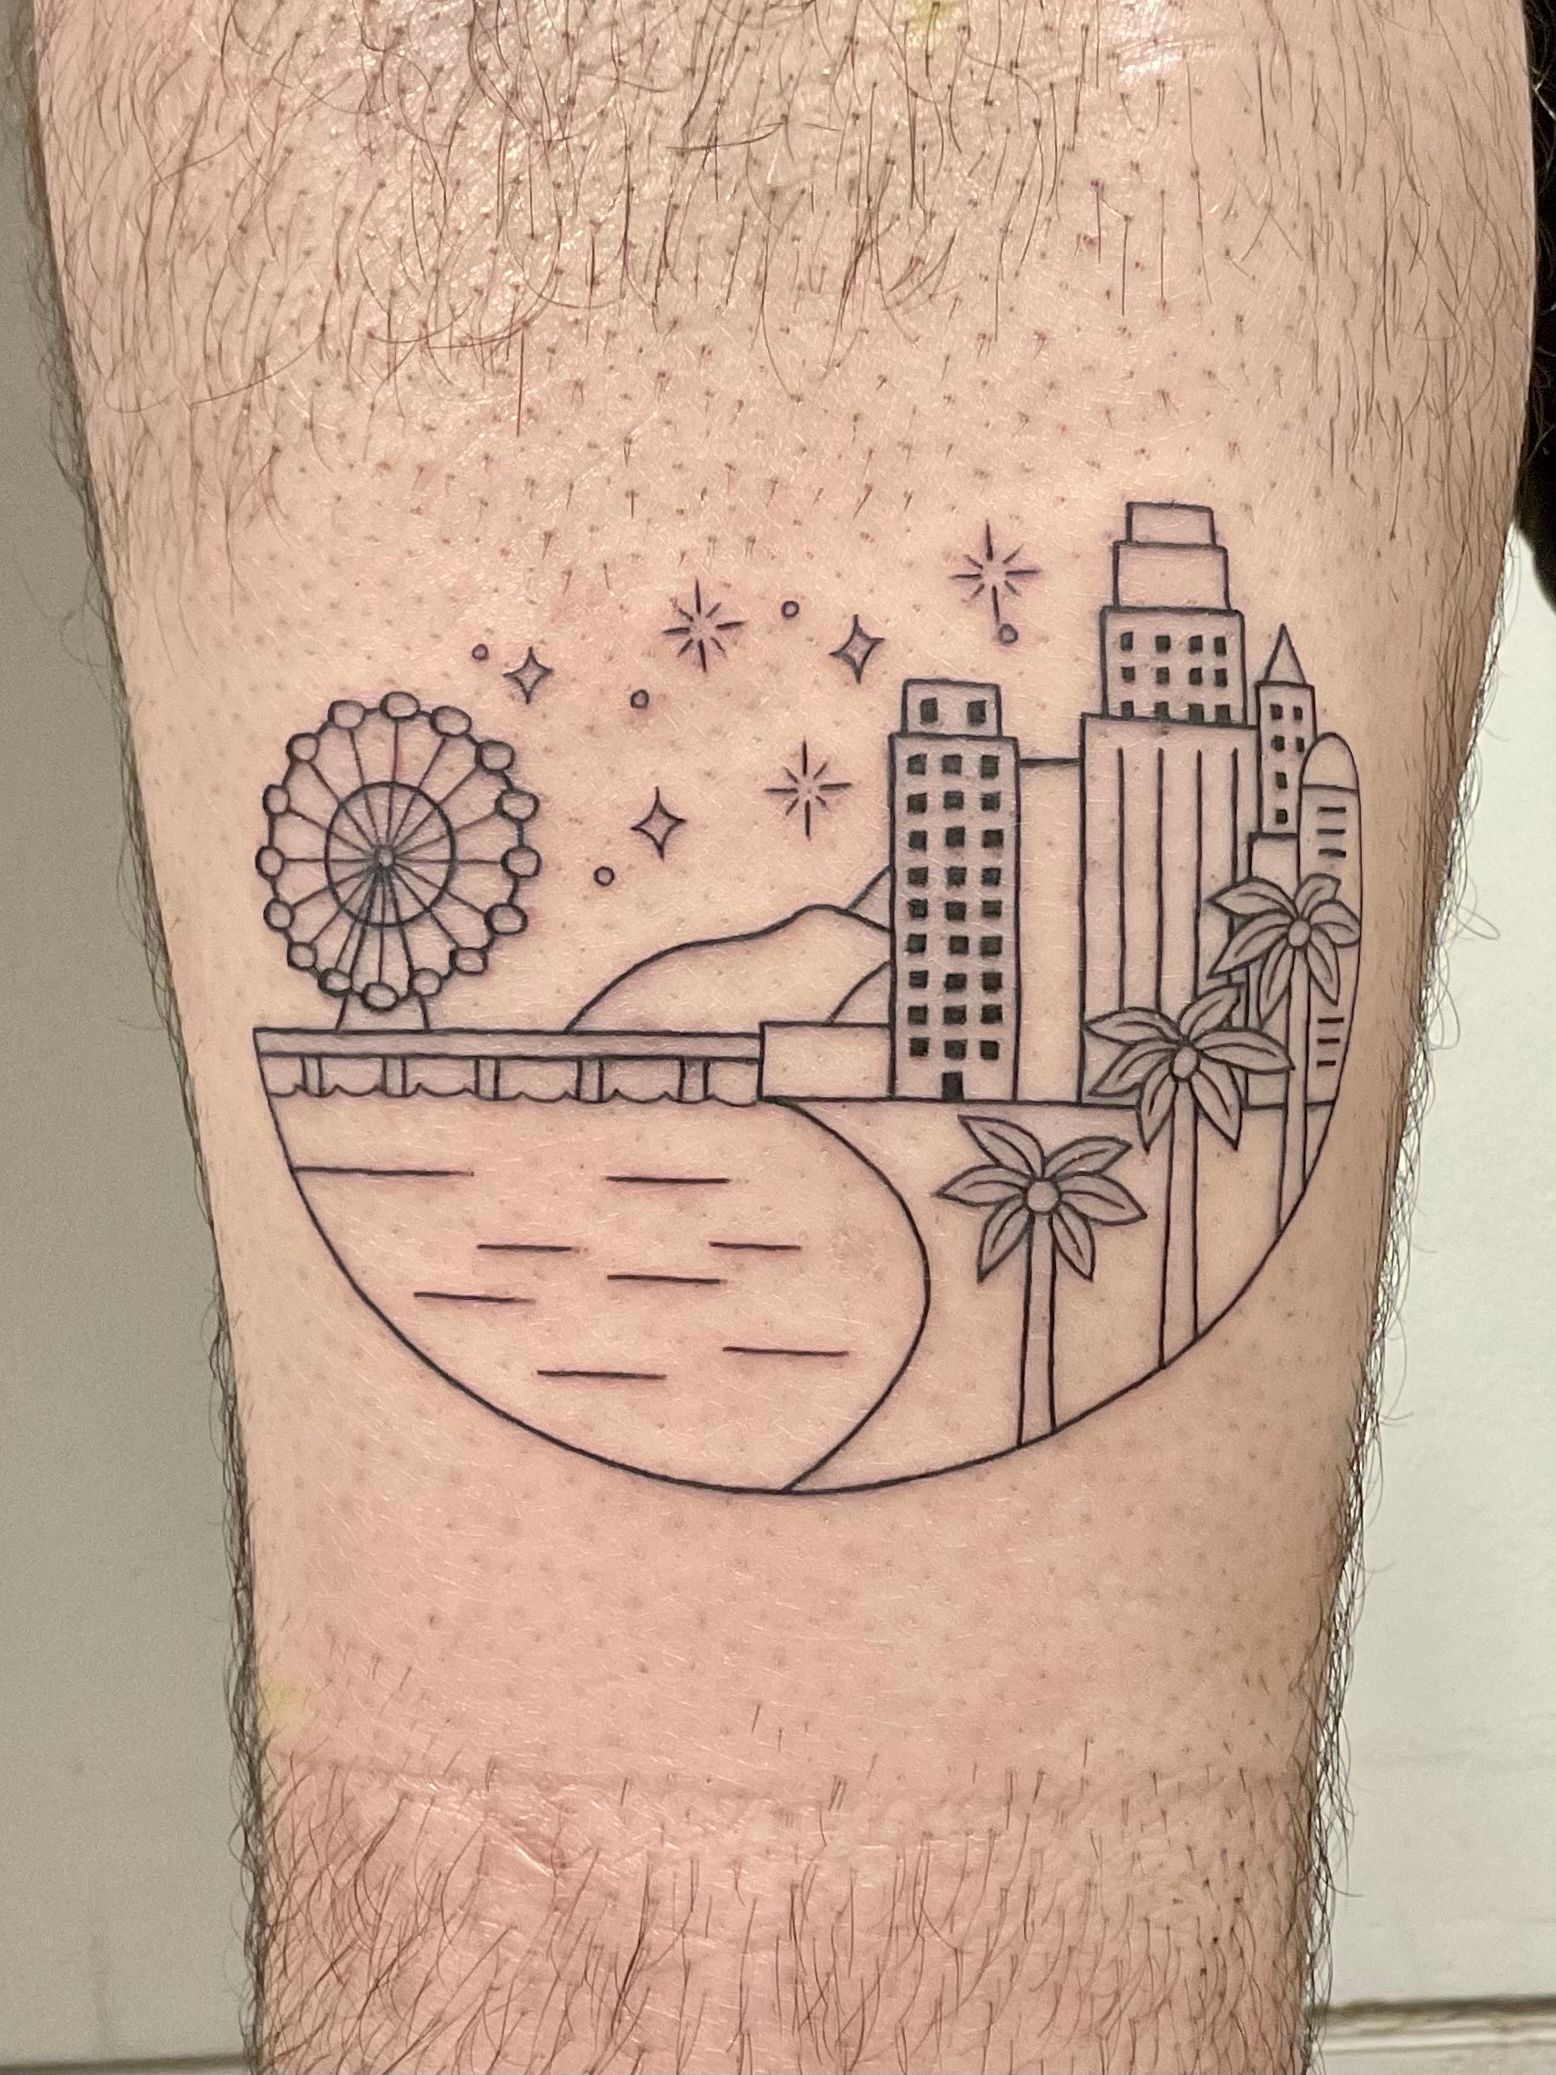 30 Los Angeles Skyline Tattoo Designs For Men  Southern California Ink  Ideas